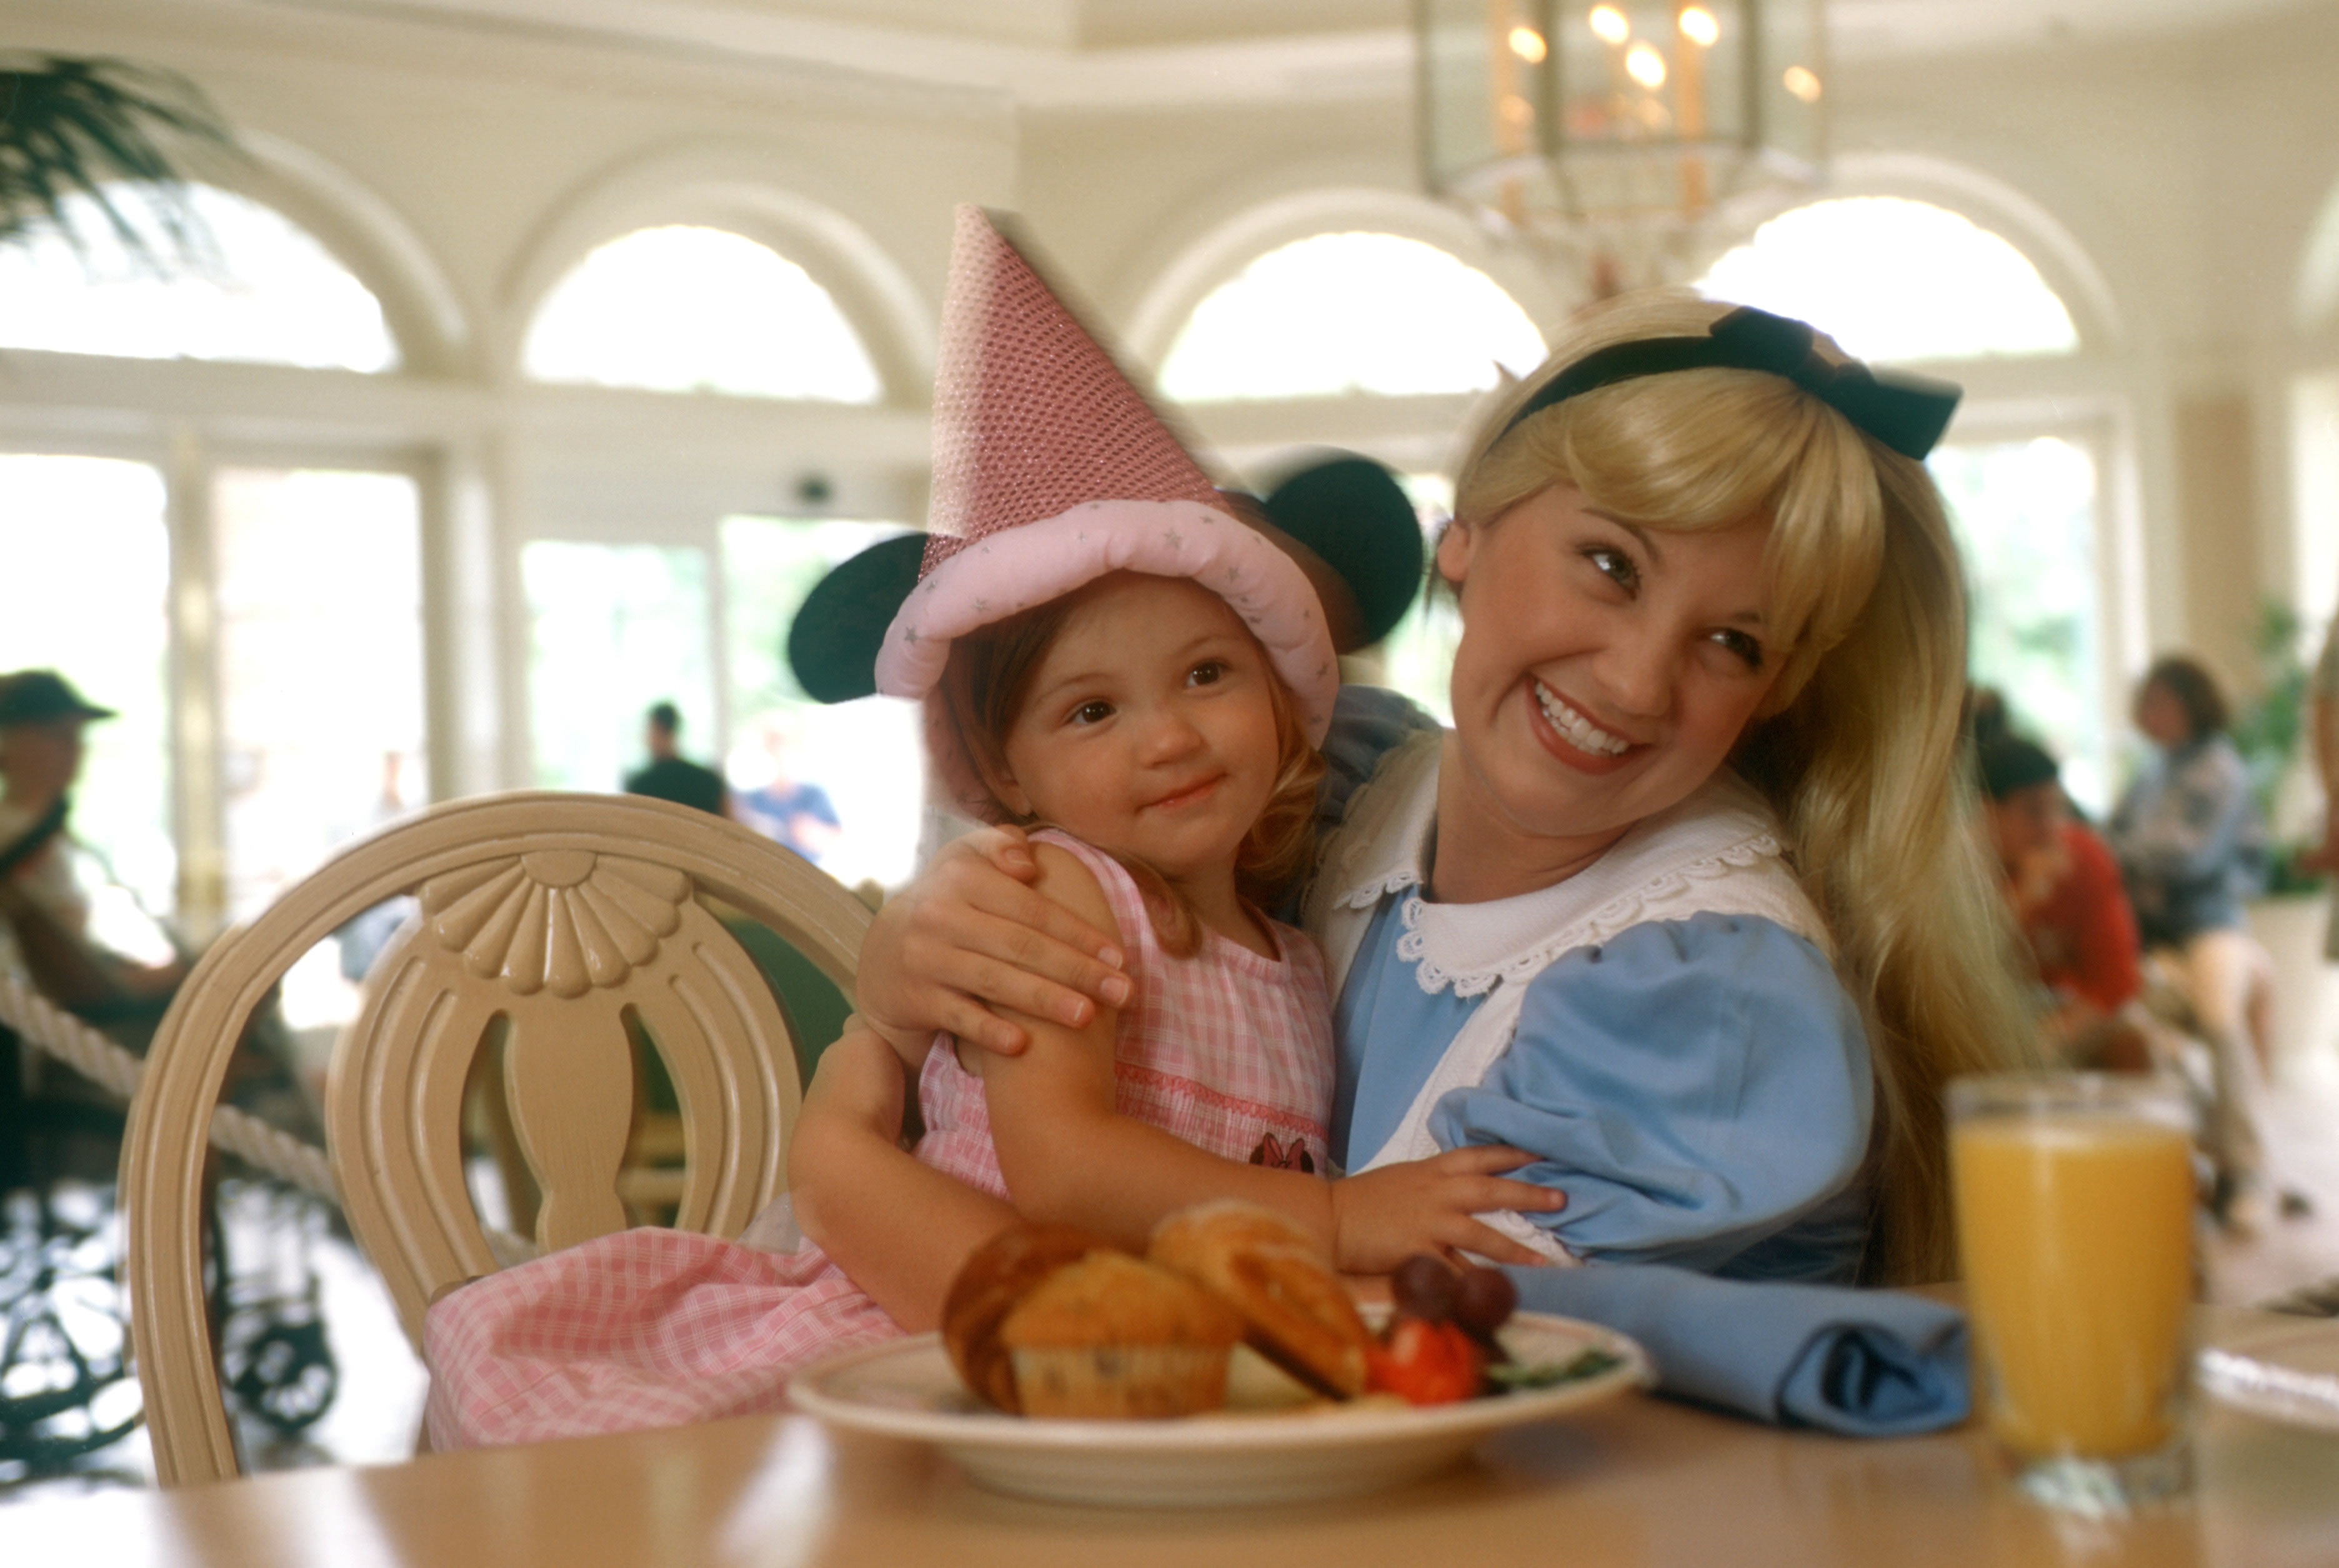 disney-visa-free-dining-2012-available-for-select-fall-dates-off-to-neverland-travel-disney